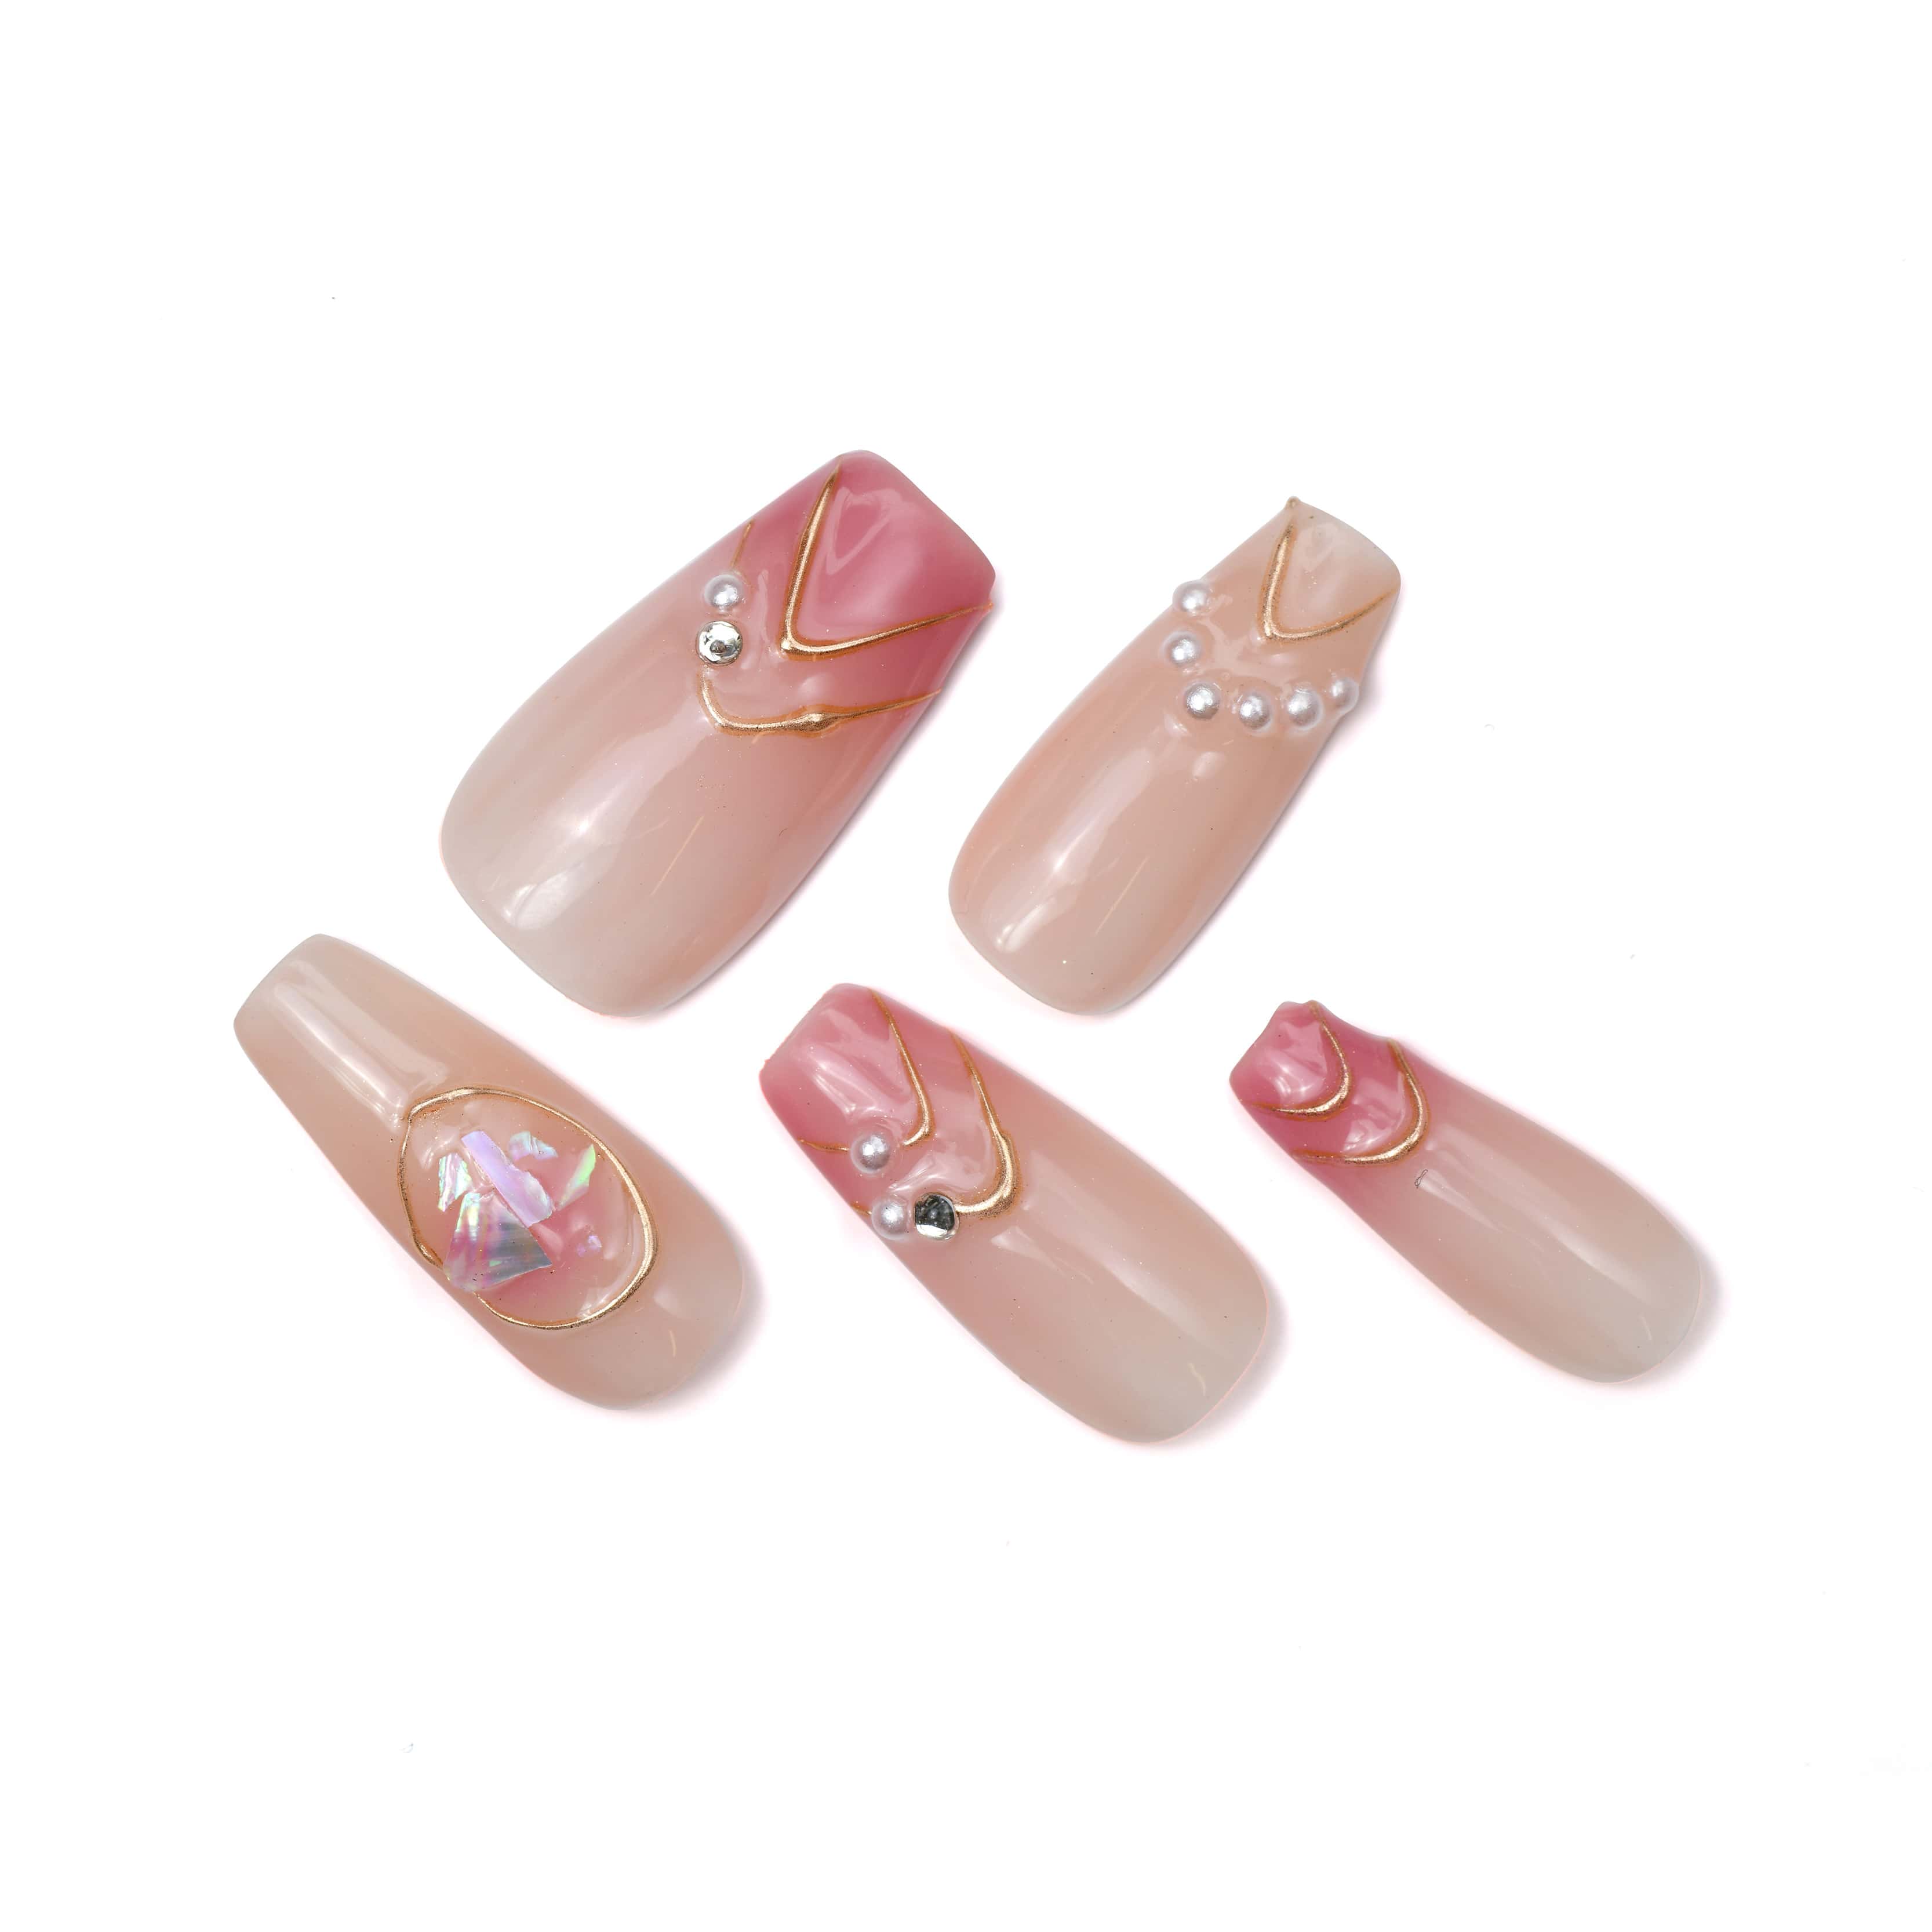 Bling Pink Nude Long Coffin Ombre Glossy Handmade Press On Nails With Jewel-BEYONDCANVA